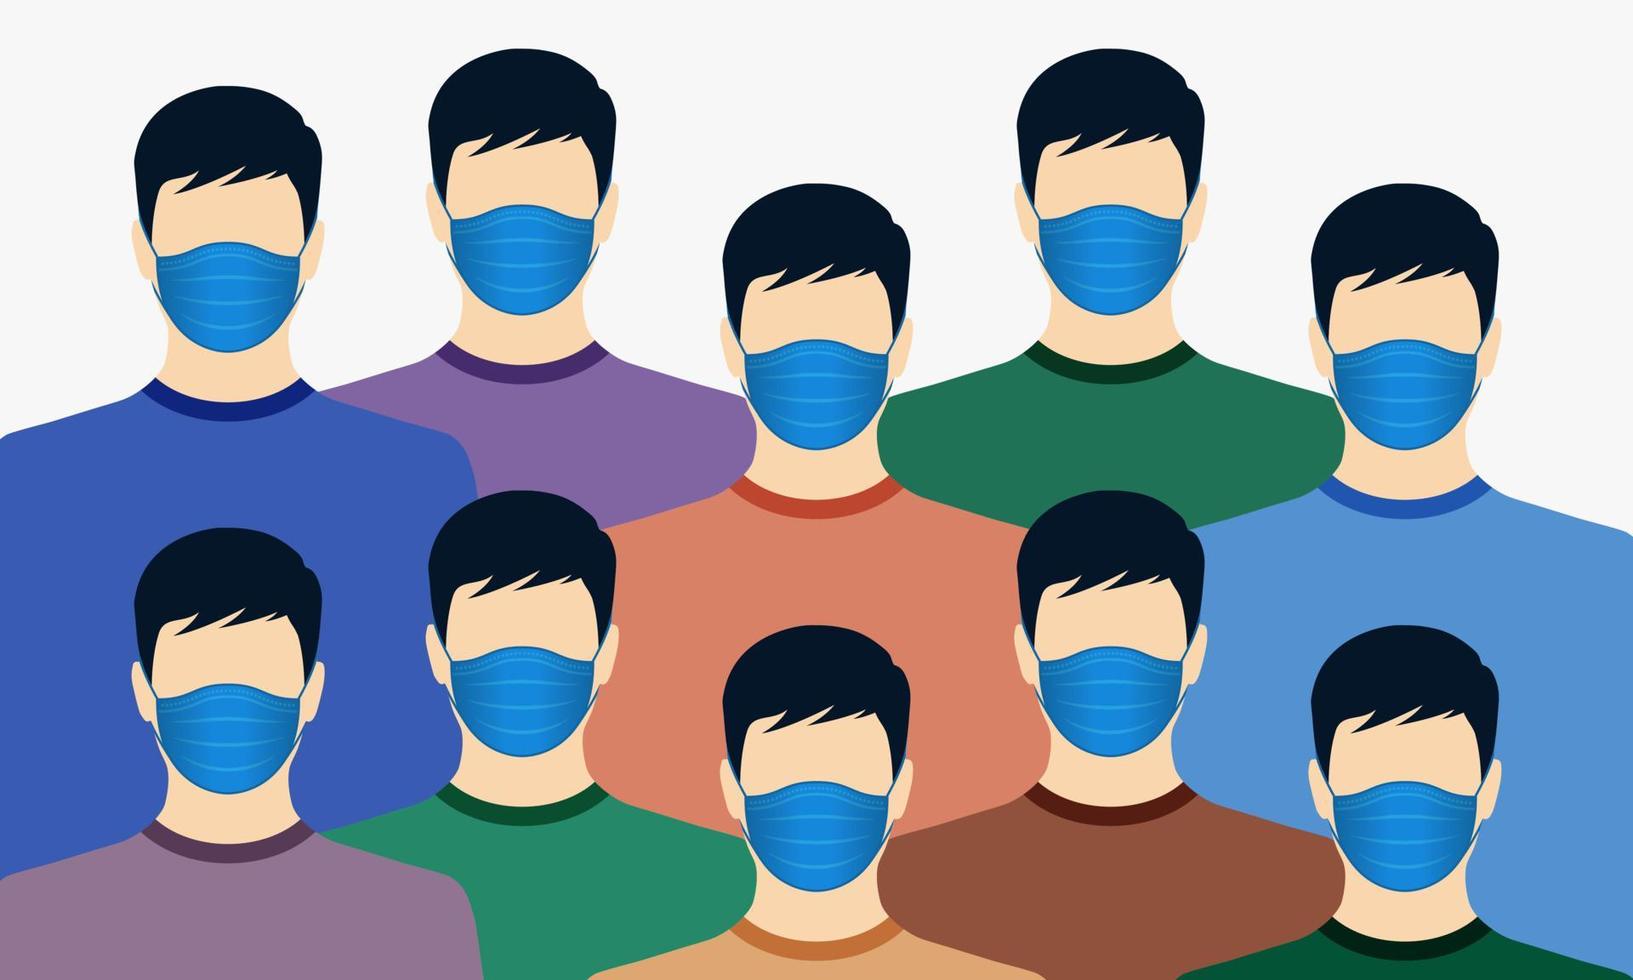 groups of people wearing masks. crowd vector illustration.